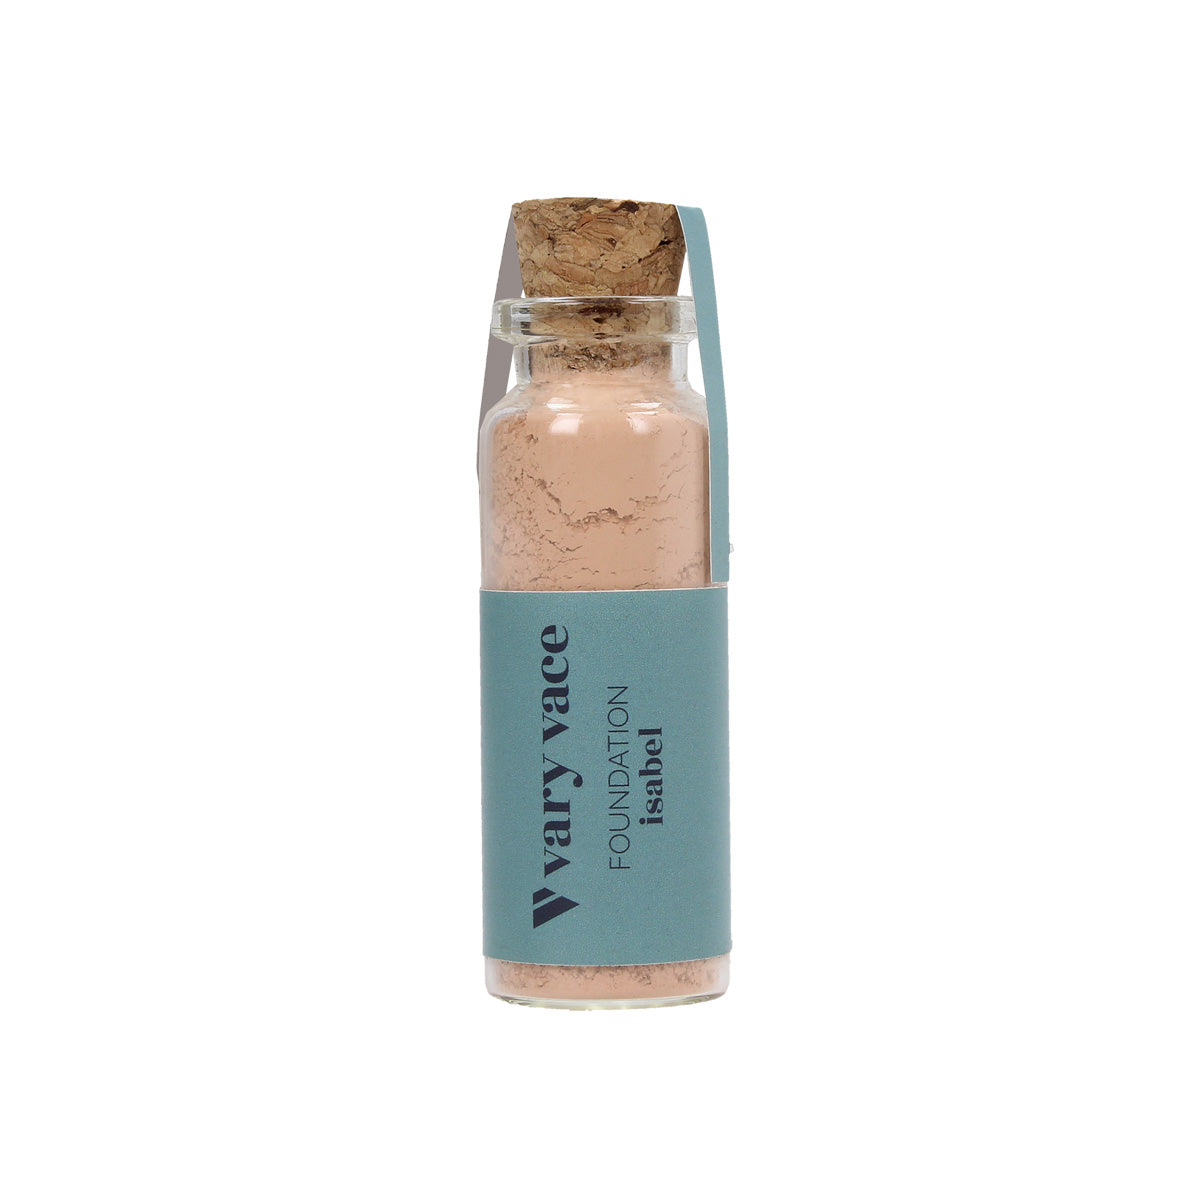 Vary Vace - Refill Foundation - Isabel (Beige)